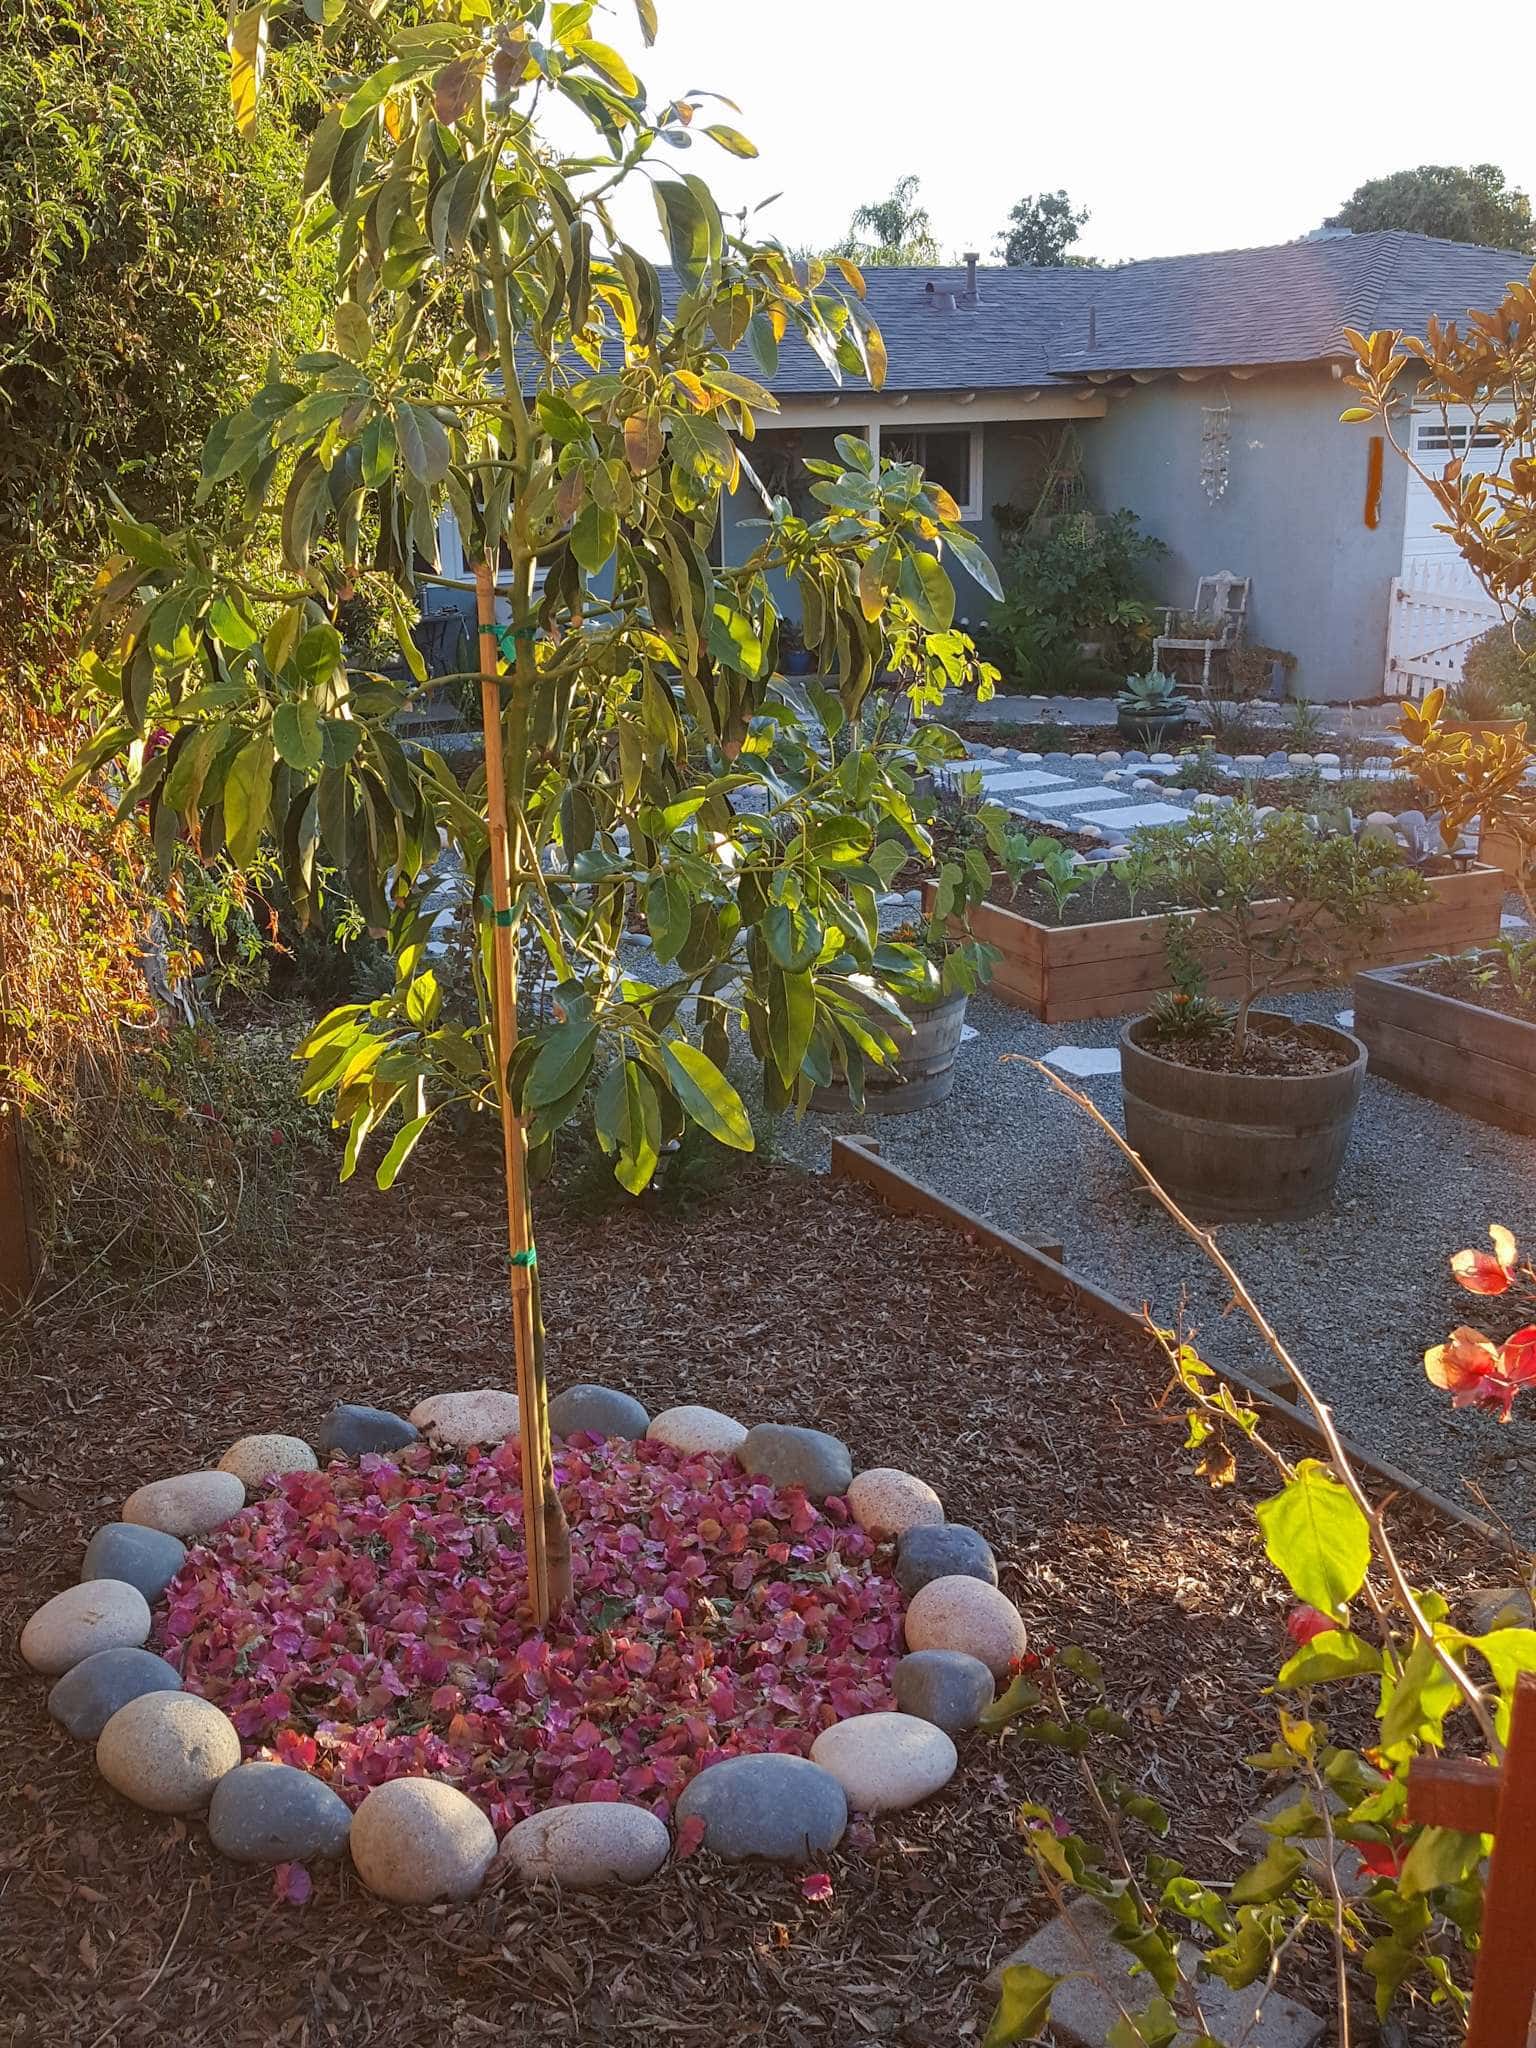 A newly planted avocado tree is enjoying the golden evening sun rays. The tree is surround by a rock ring made out of river rocks and it is mulched with pink leaves from a nearby bougainvillea. In the background are raised beds for vegetables and a small tree in a half wine barrel container. There is a house even further behind as the backdrop where there is a tall Japanese Aralia next to an old chair that has succulents planted in it.